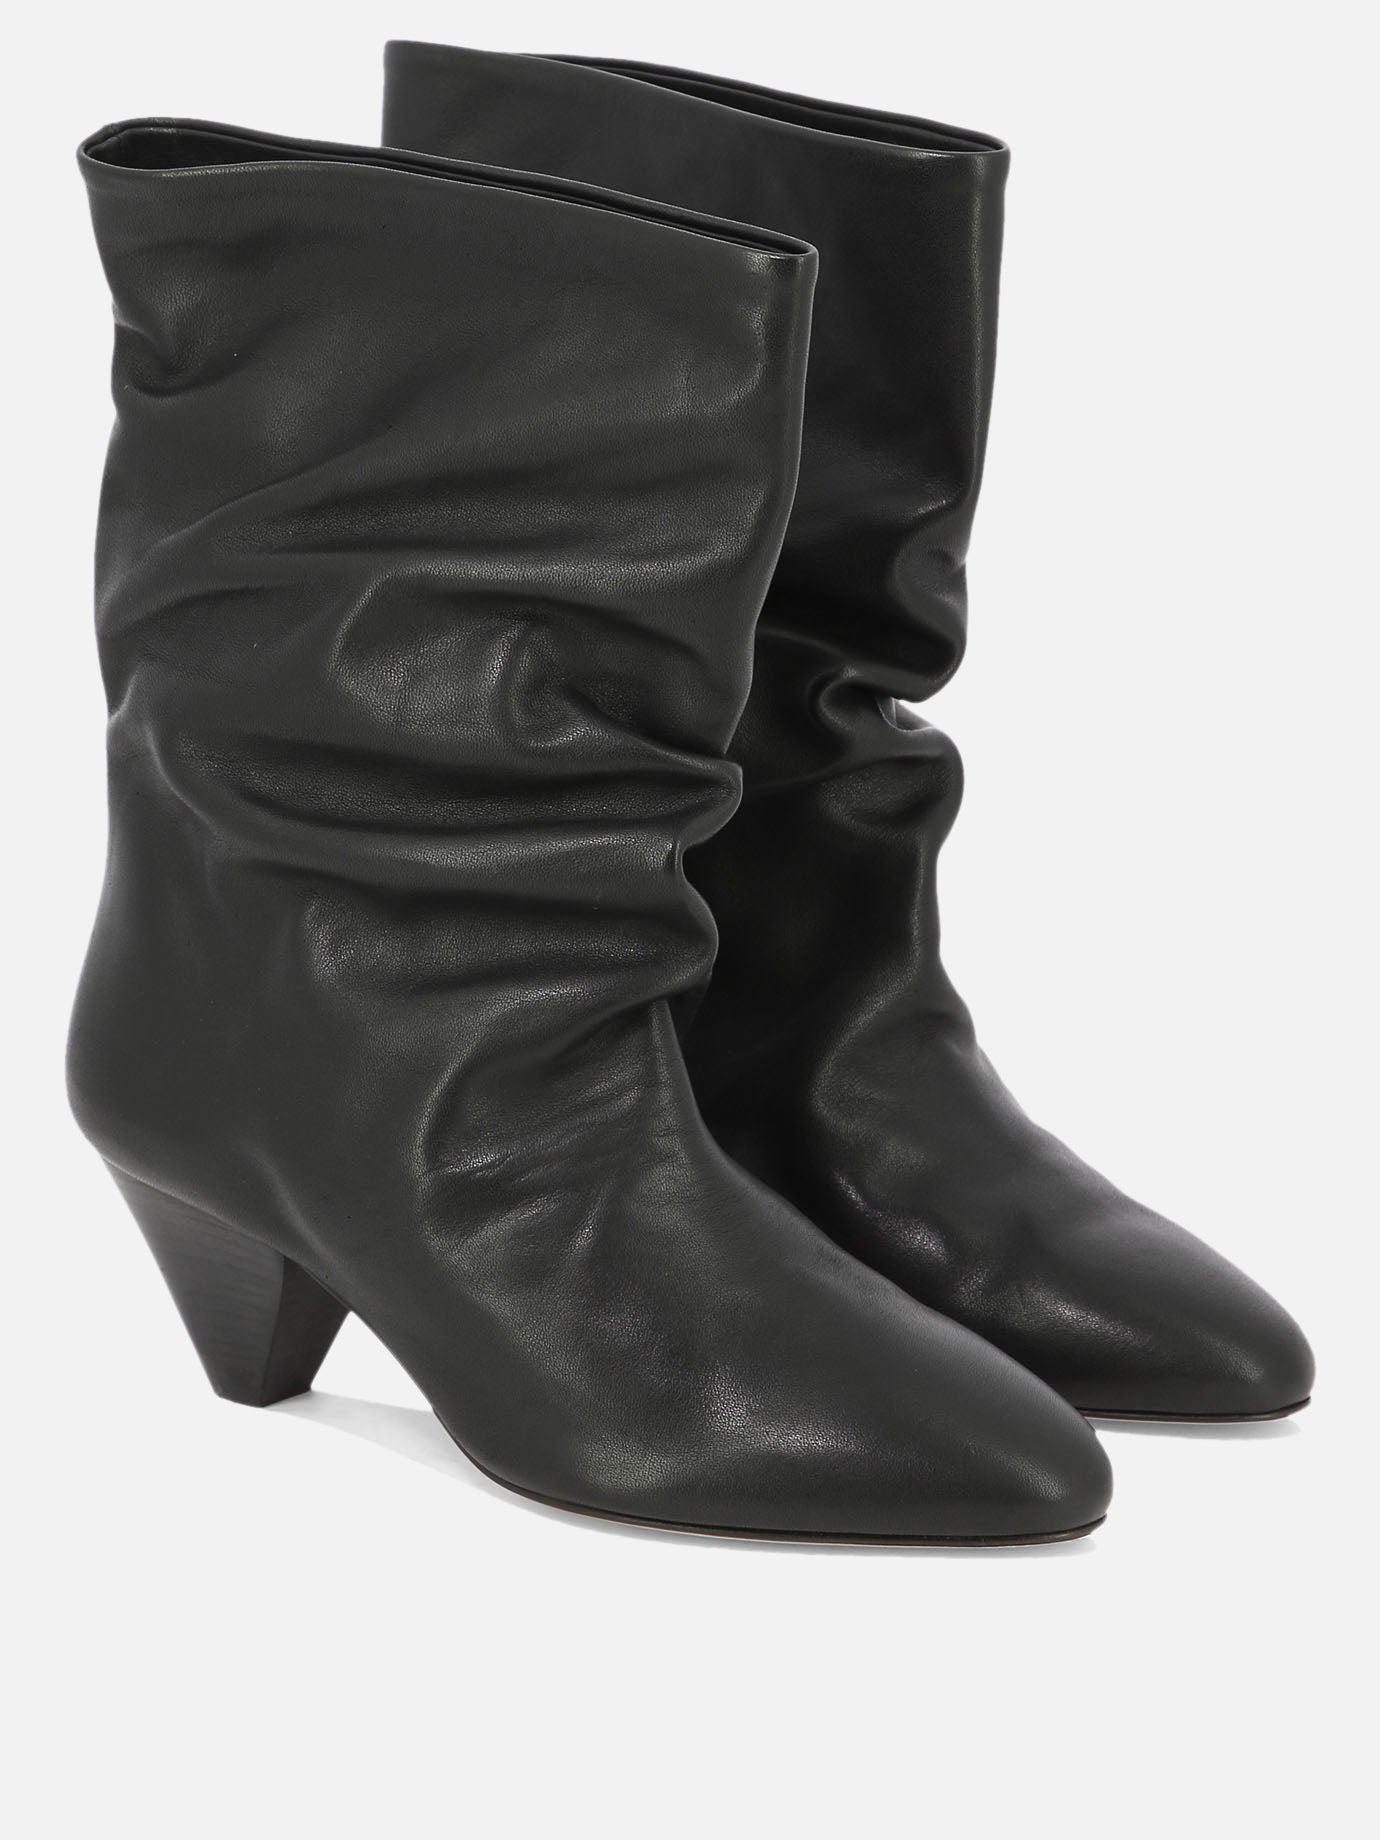 "Reachi" ankle boots